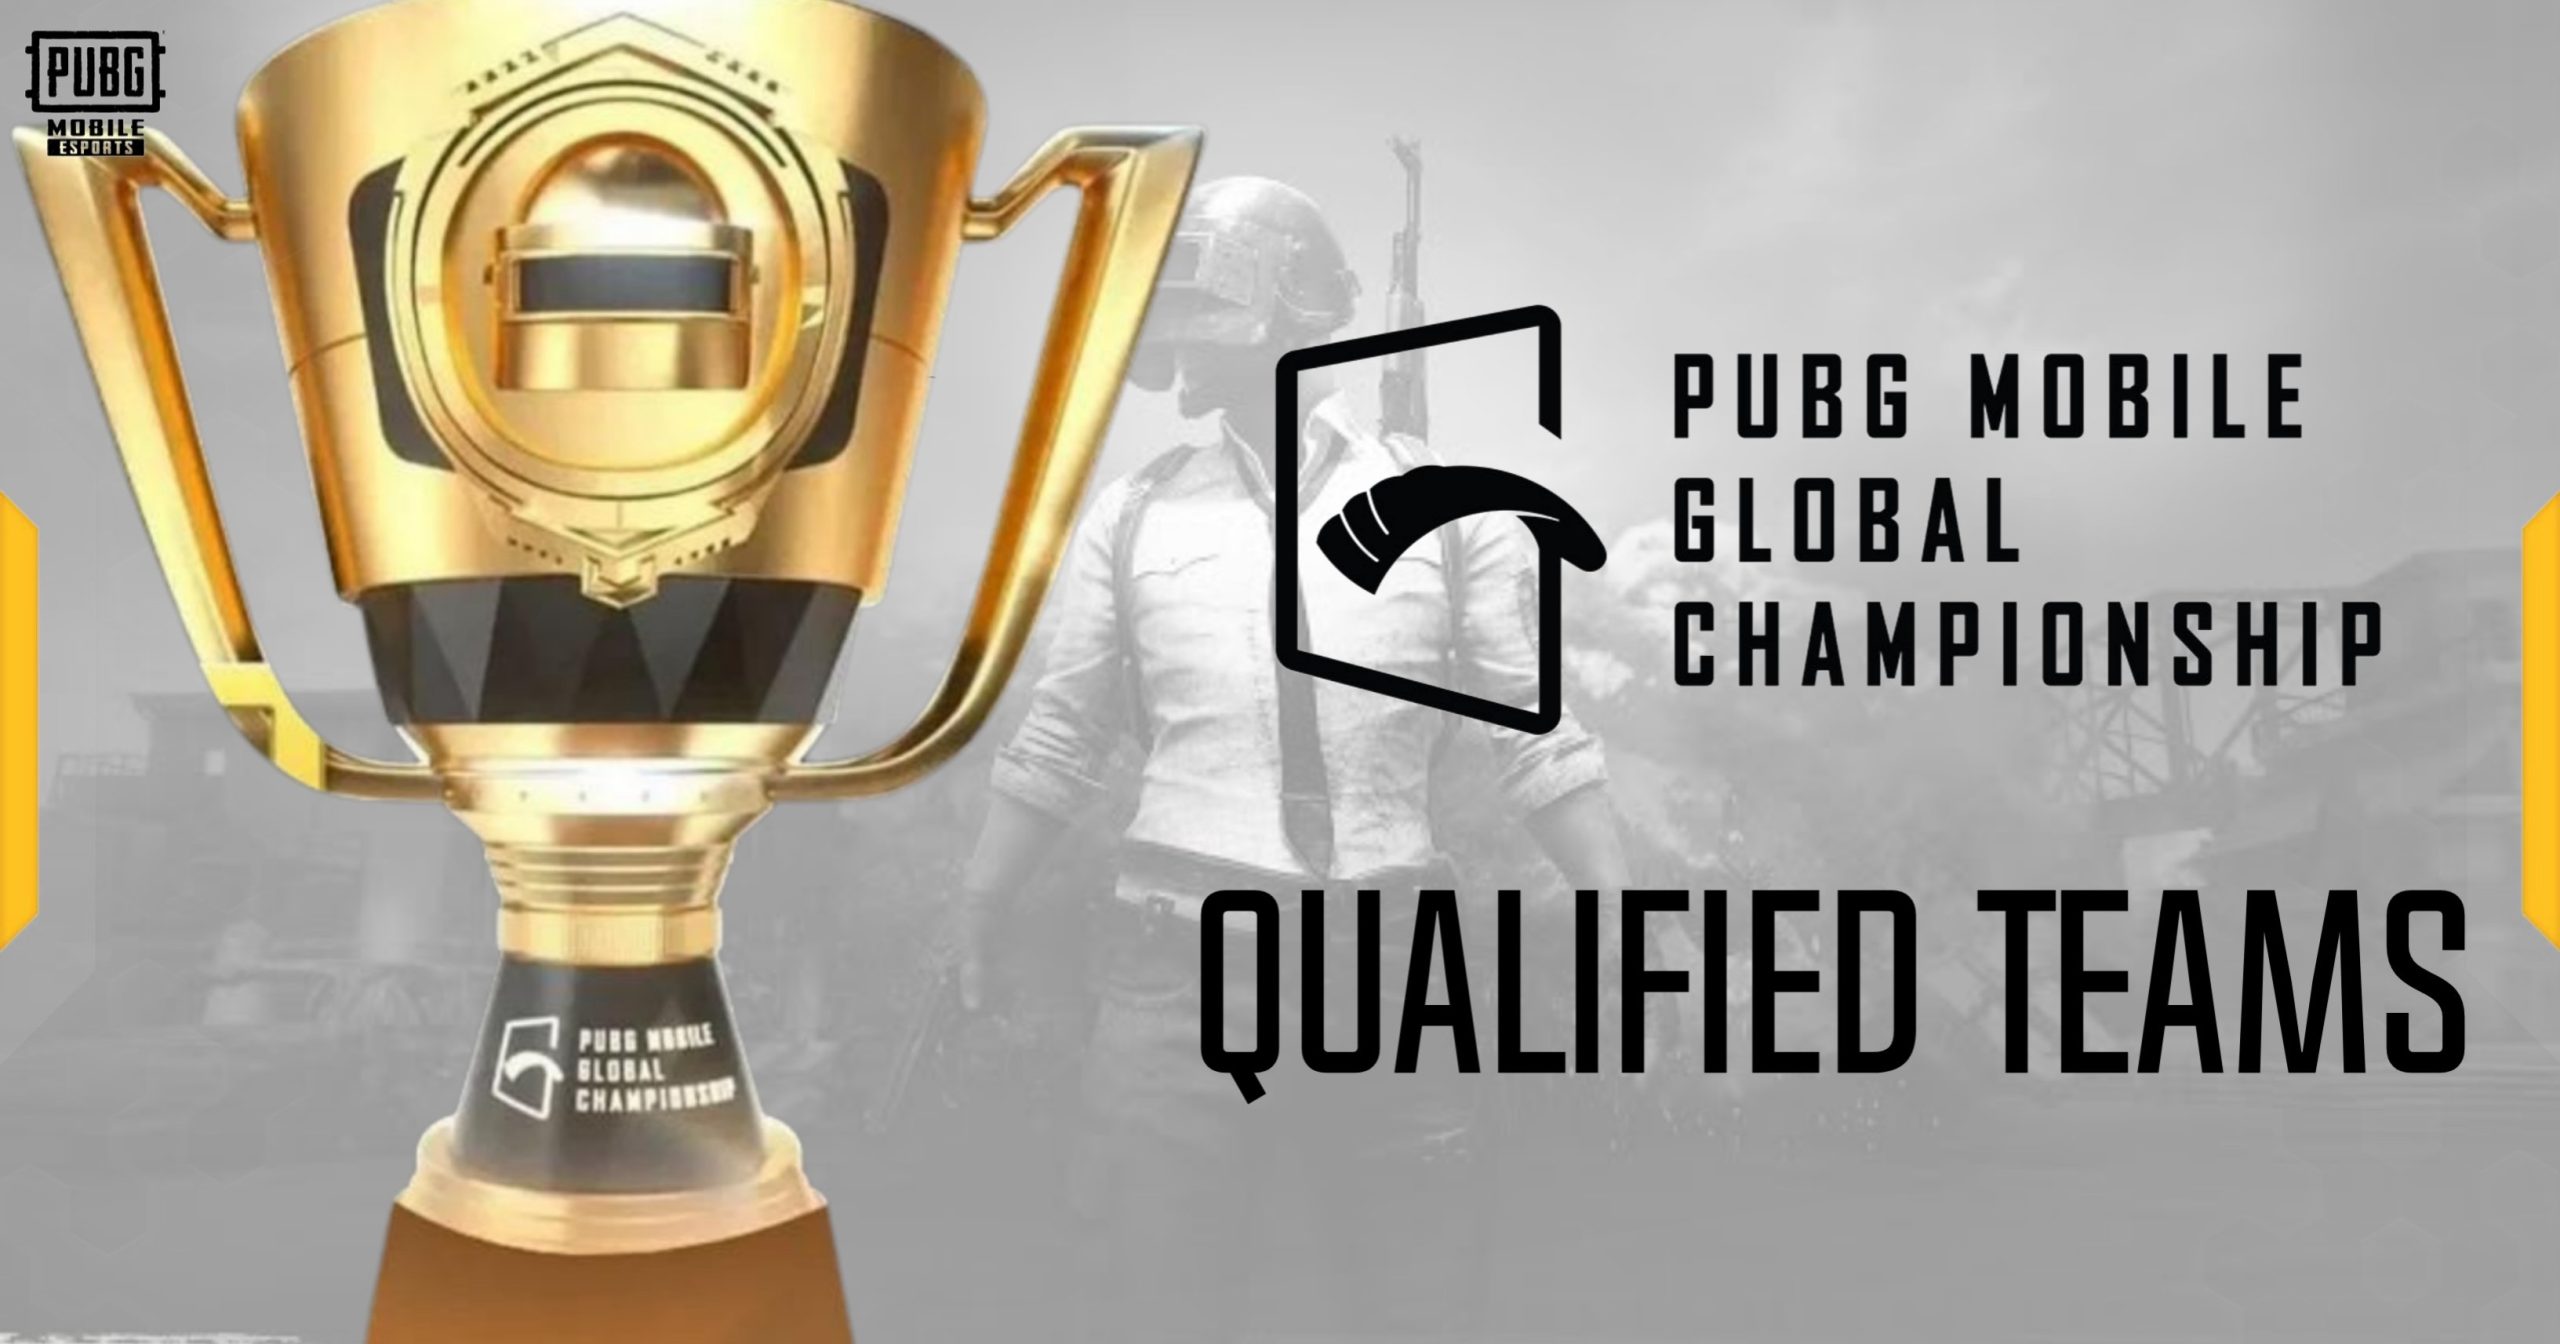 You are currently viewing Pubg Mobile Global Championship (PMGC) 2022 Qualified Teams